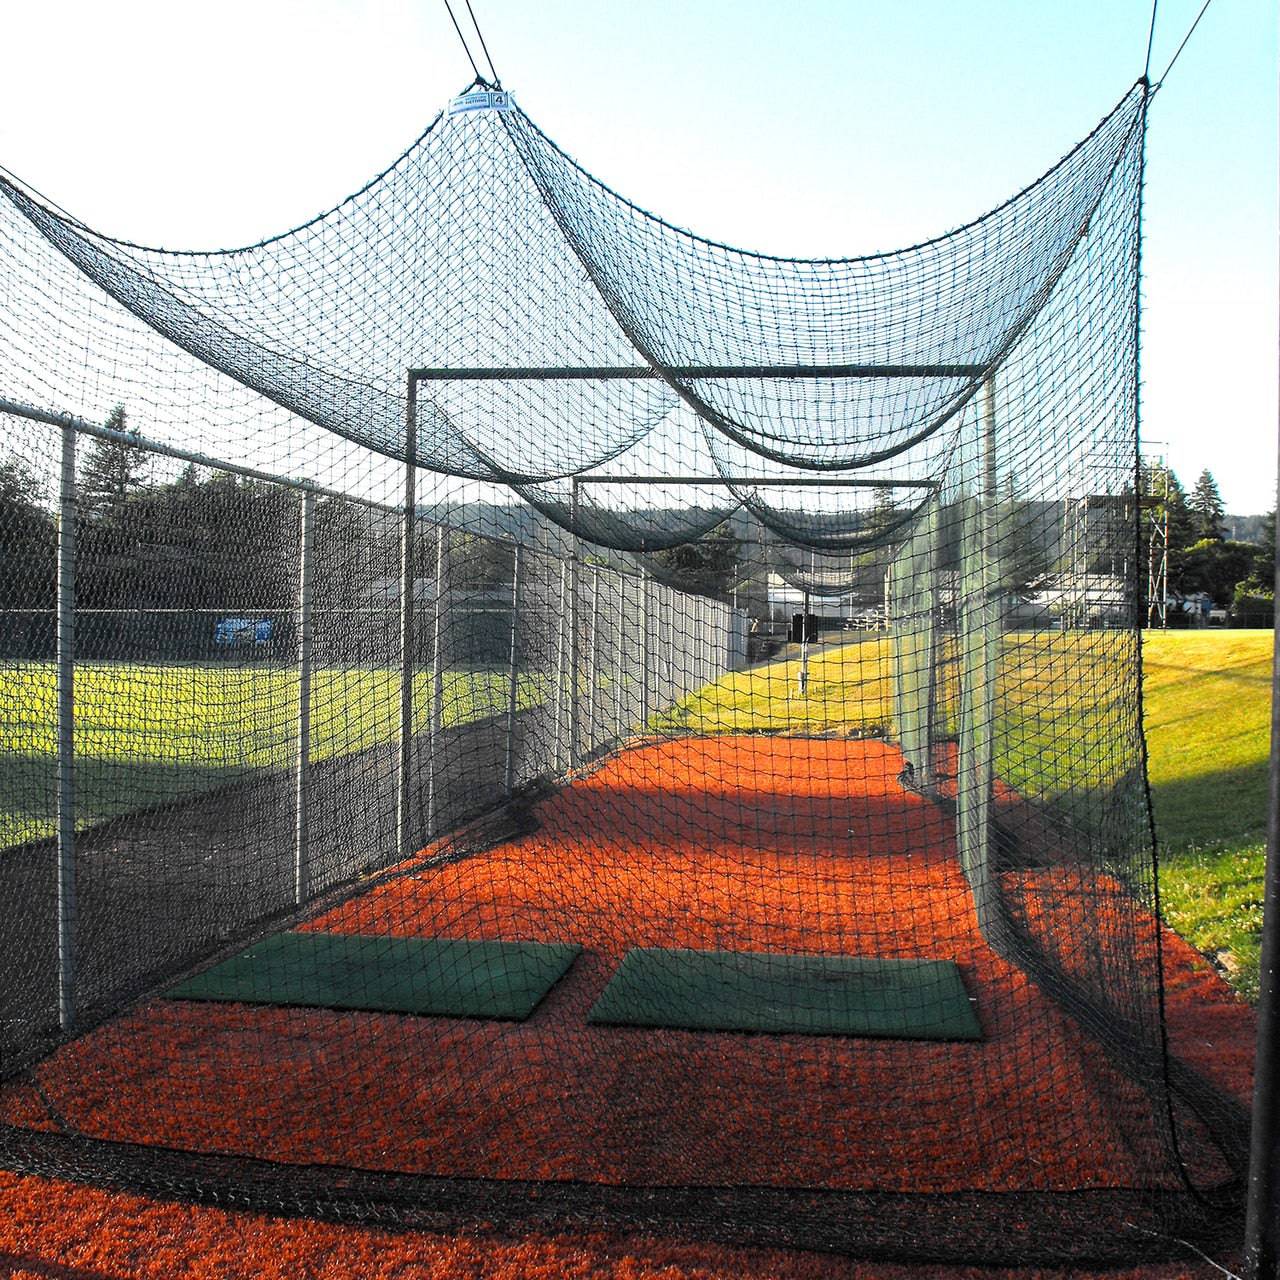 JUGS Commercial-Grade #96 Polyethylene Batting Cage Nets (Net Only)